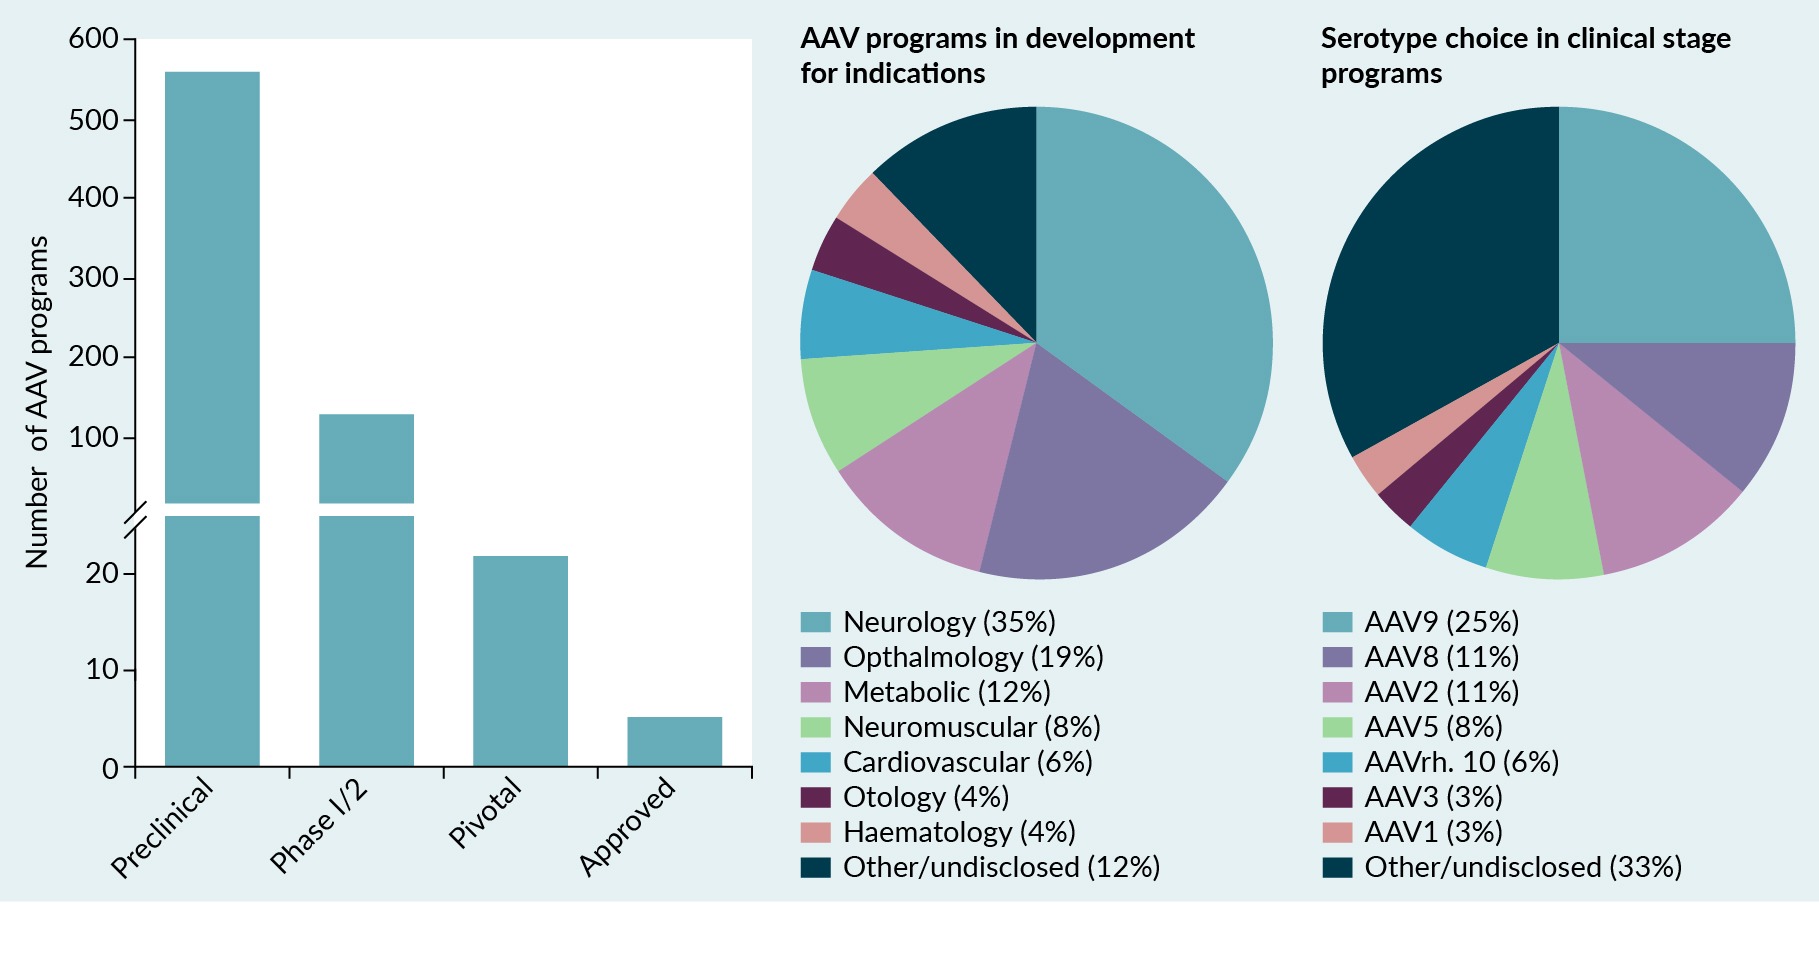 More than 700 AAV programs are being developed for a range of indications, including neurologic, ophthalmologic, and metabolic conditions. The most commonly used AAV serotypes used in clinical trials include AAV9, AAV8, AAV2, and AAV5.